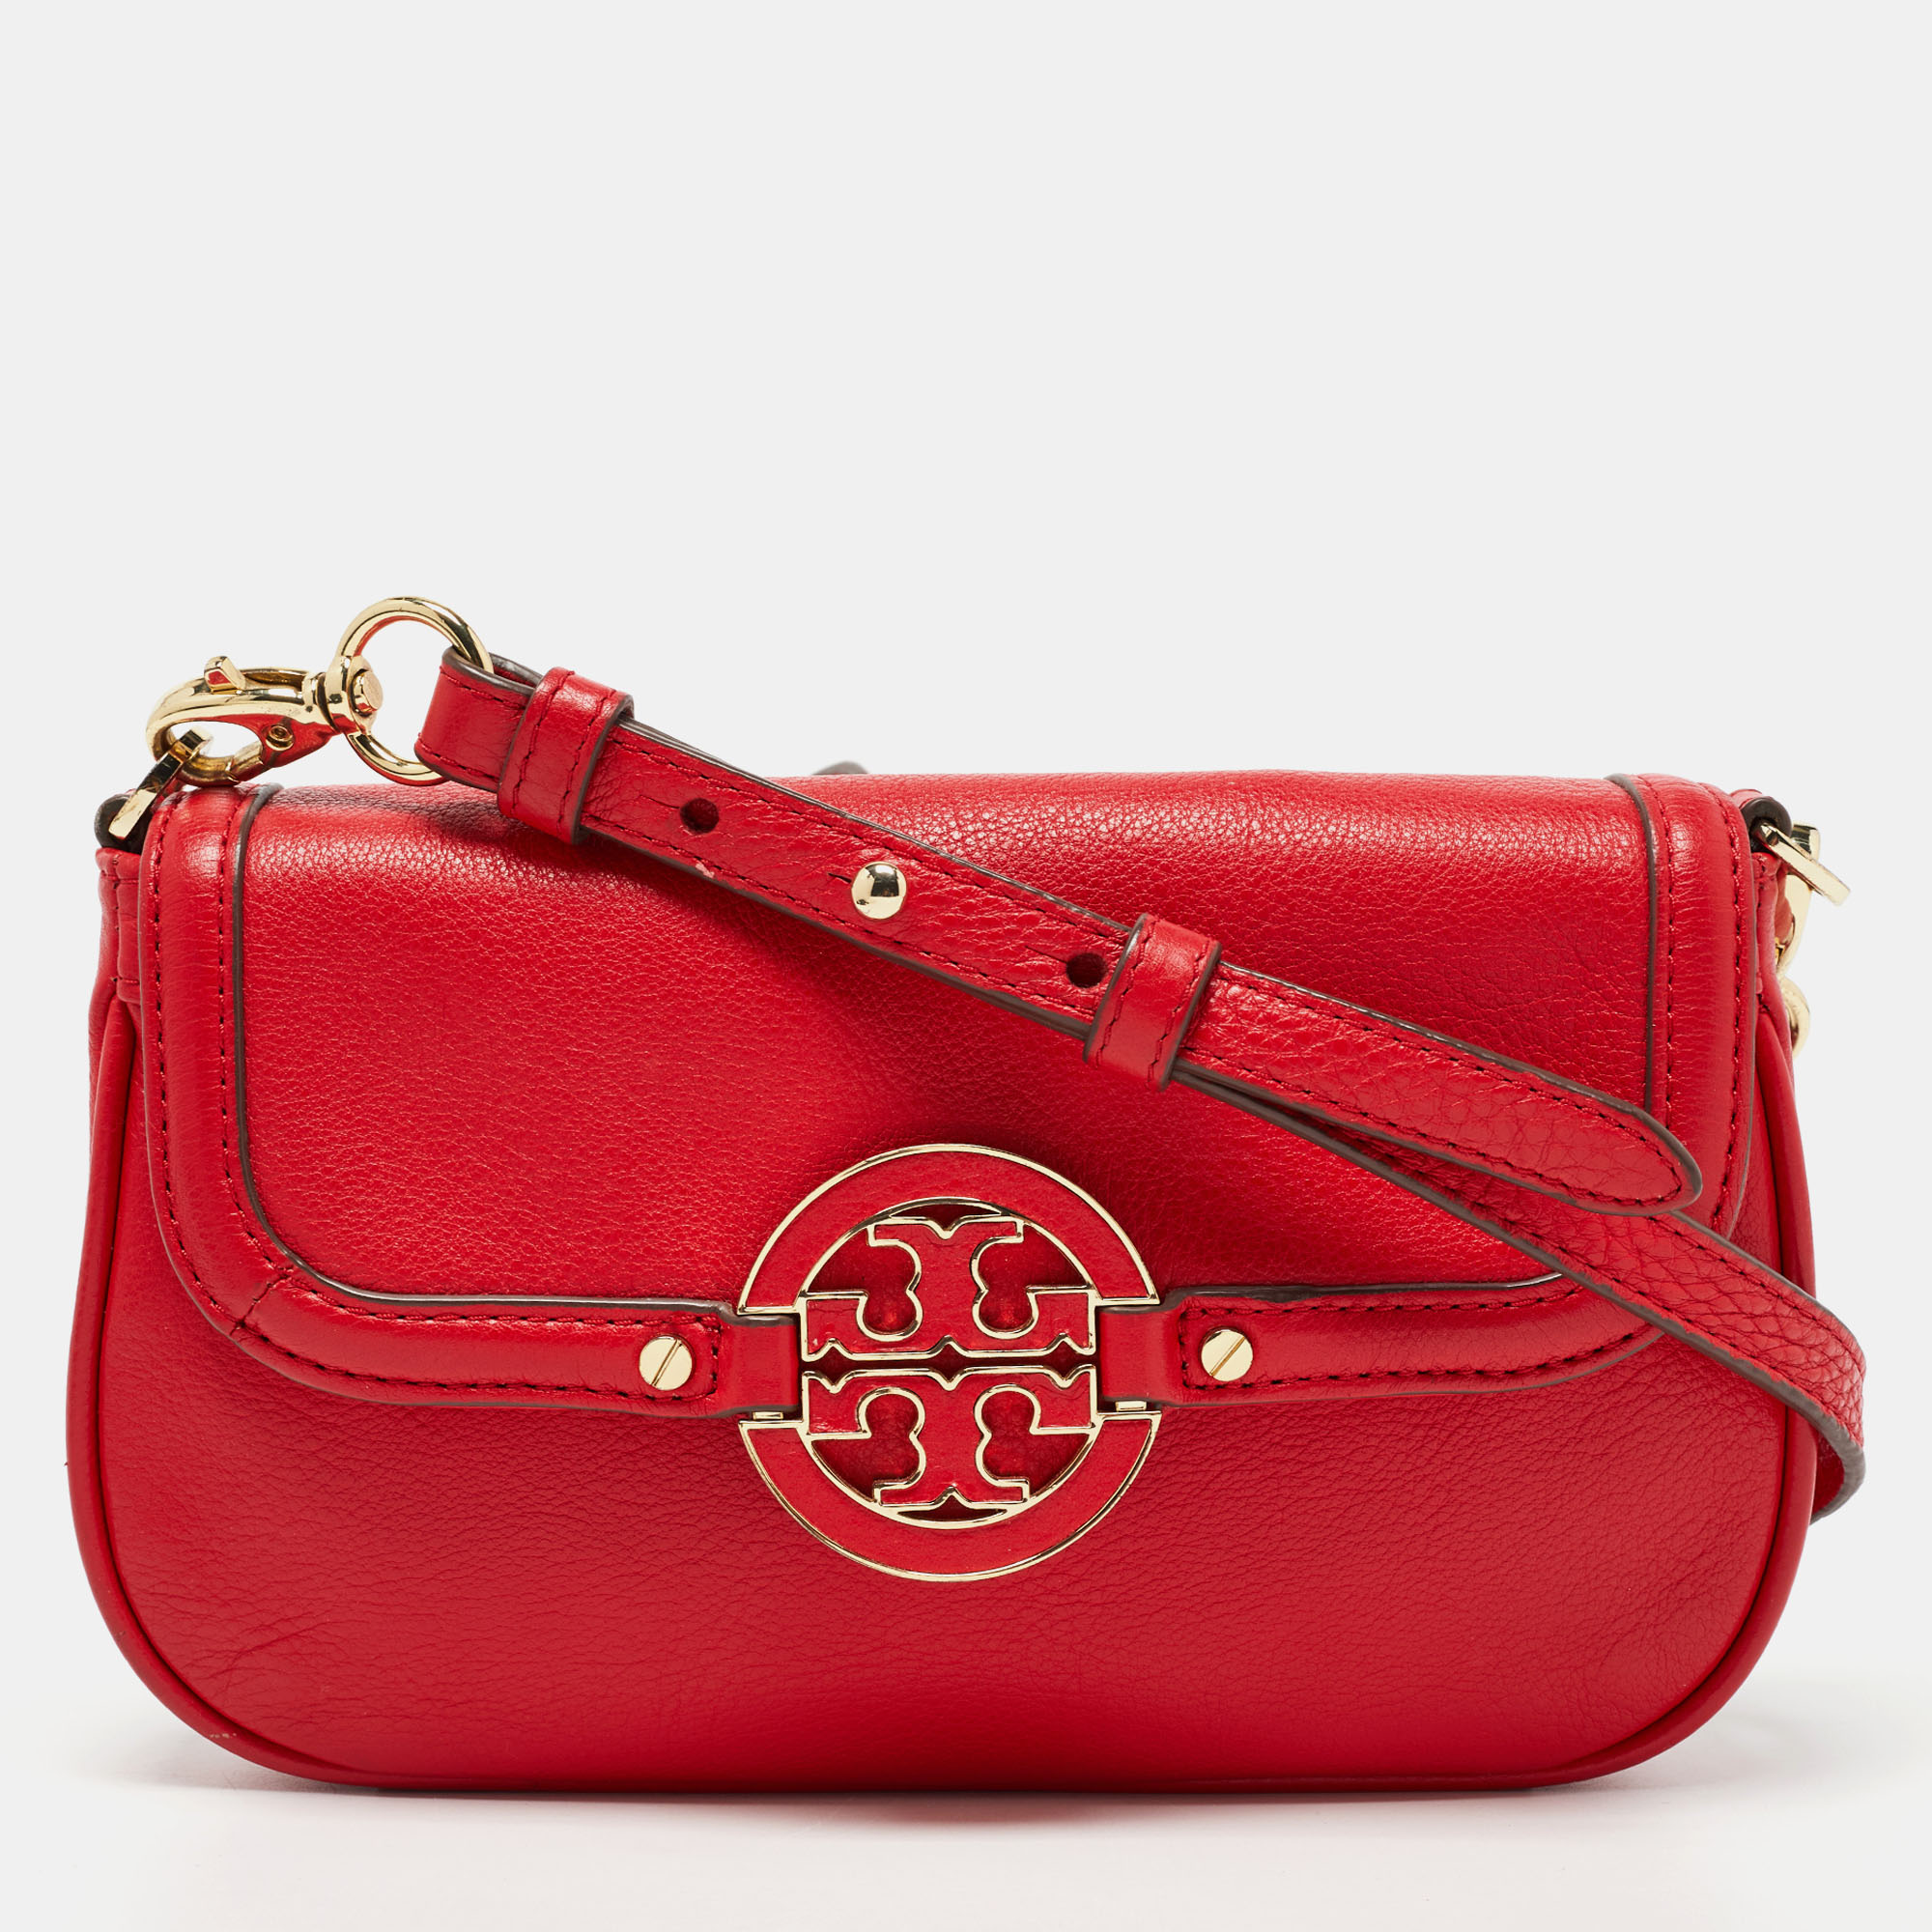 Pre-owned Tory Burch Red Leather Amanda Crossbody Bag